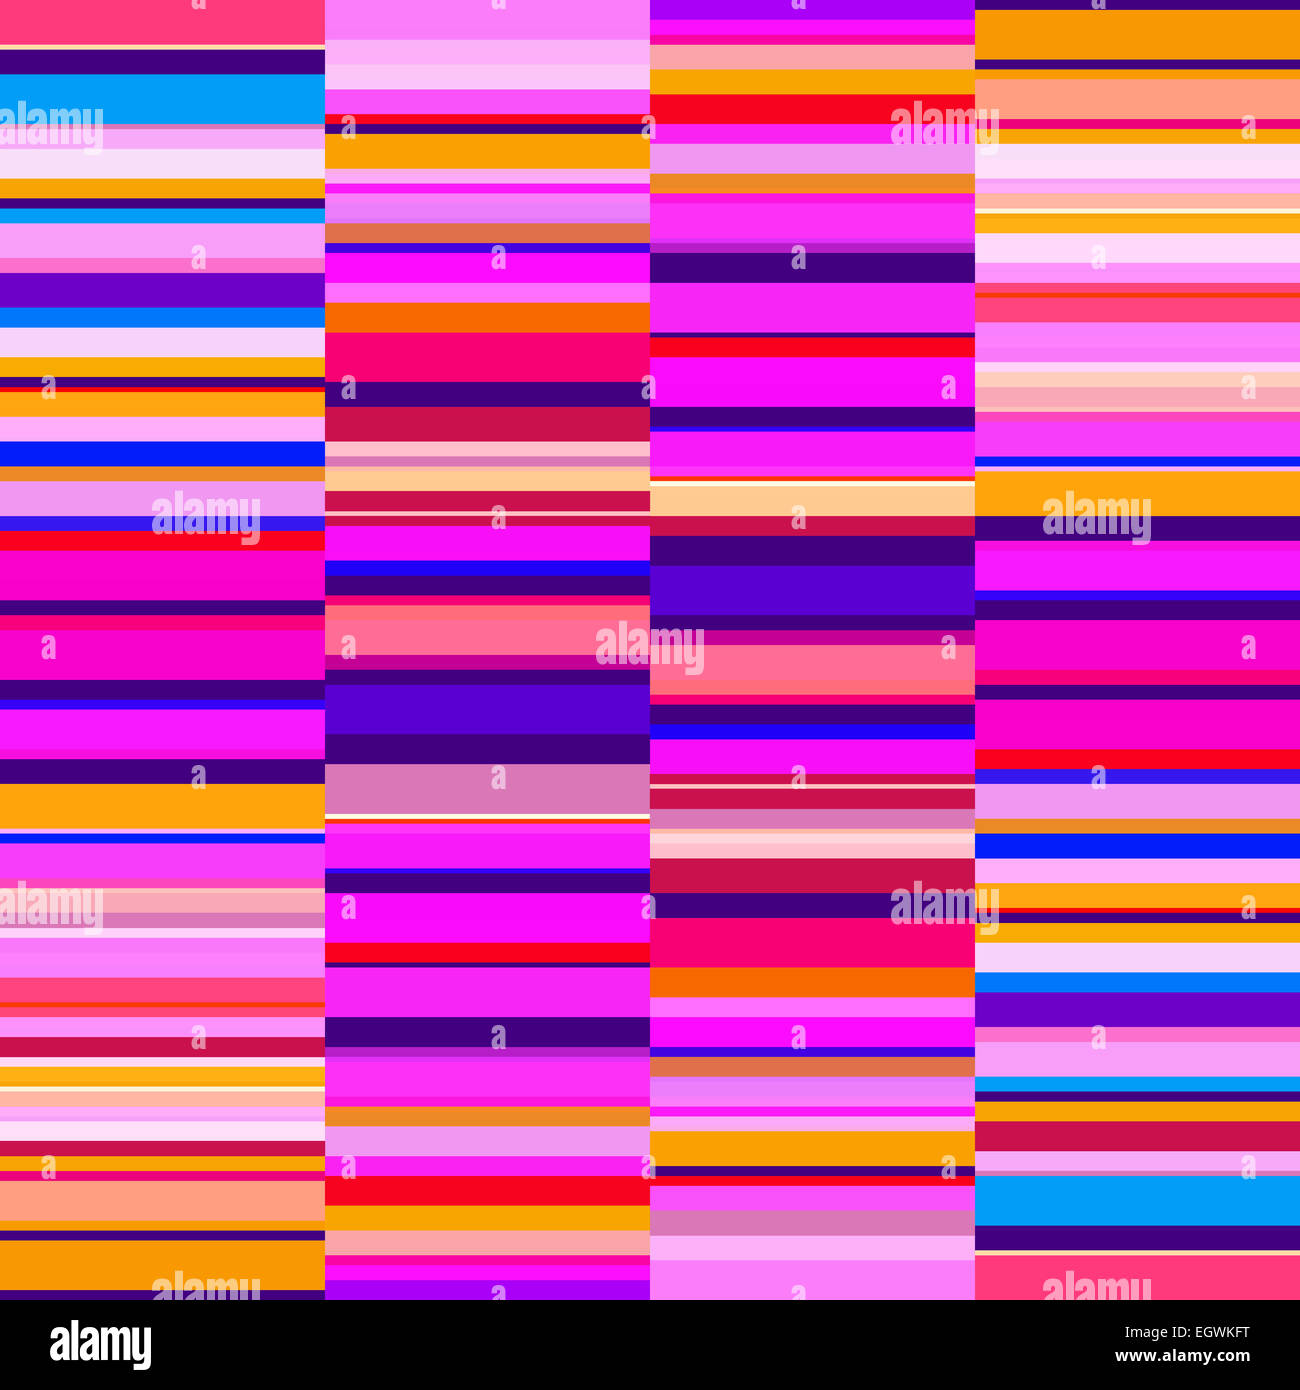 Color Blocks Images – Browse 1,331 Stock Photos, Vectors, and